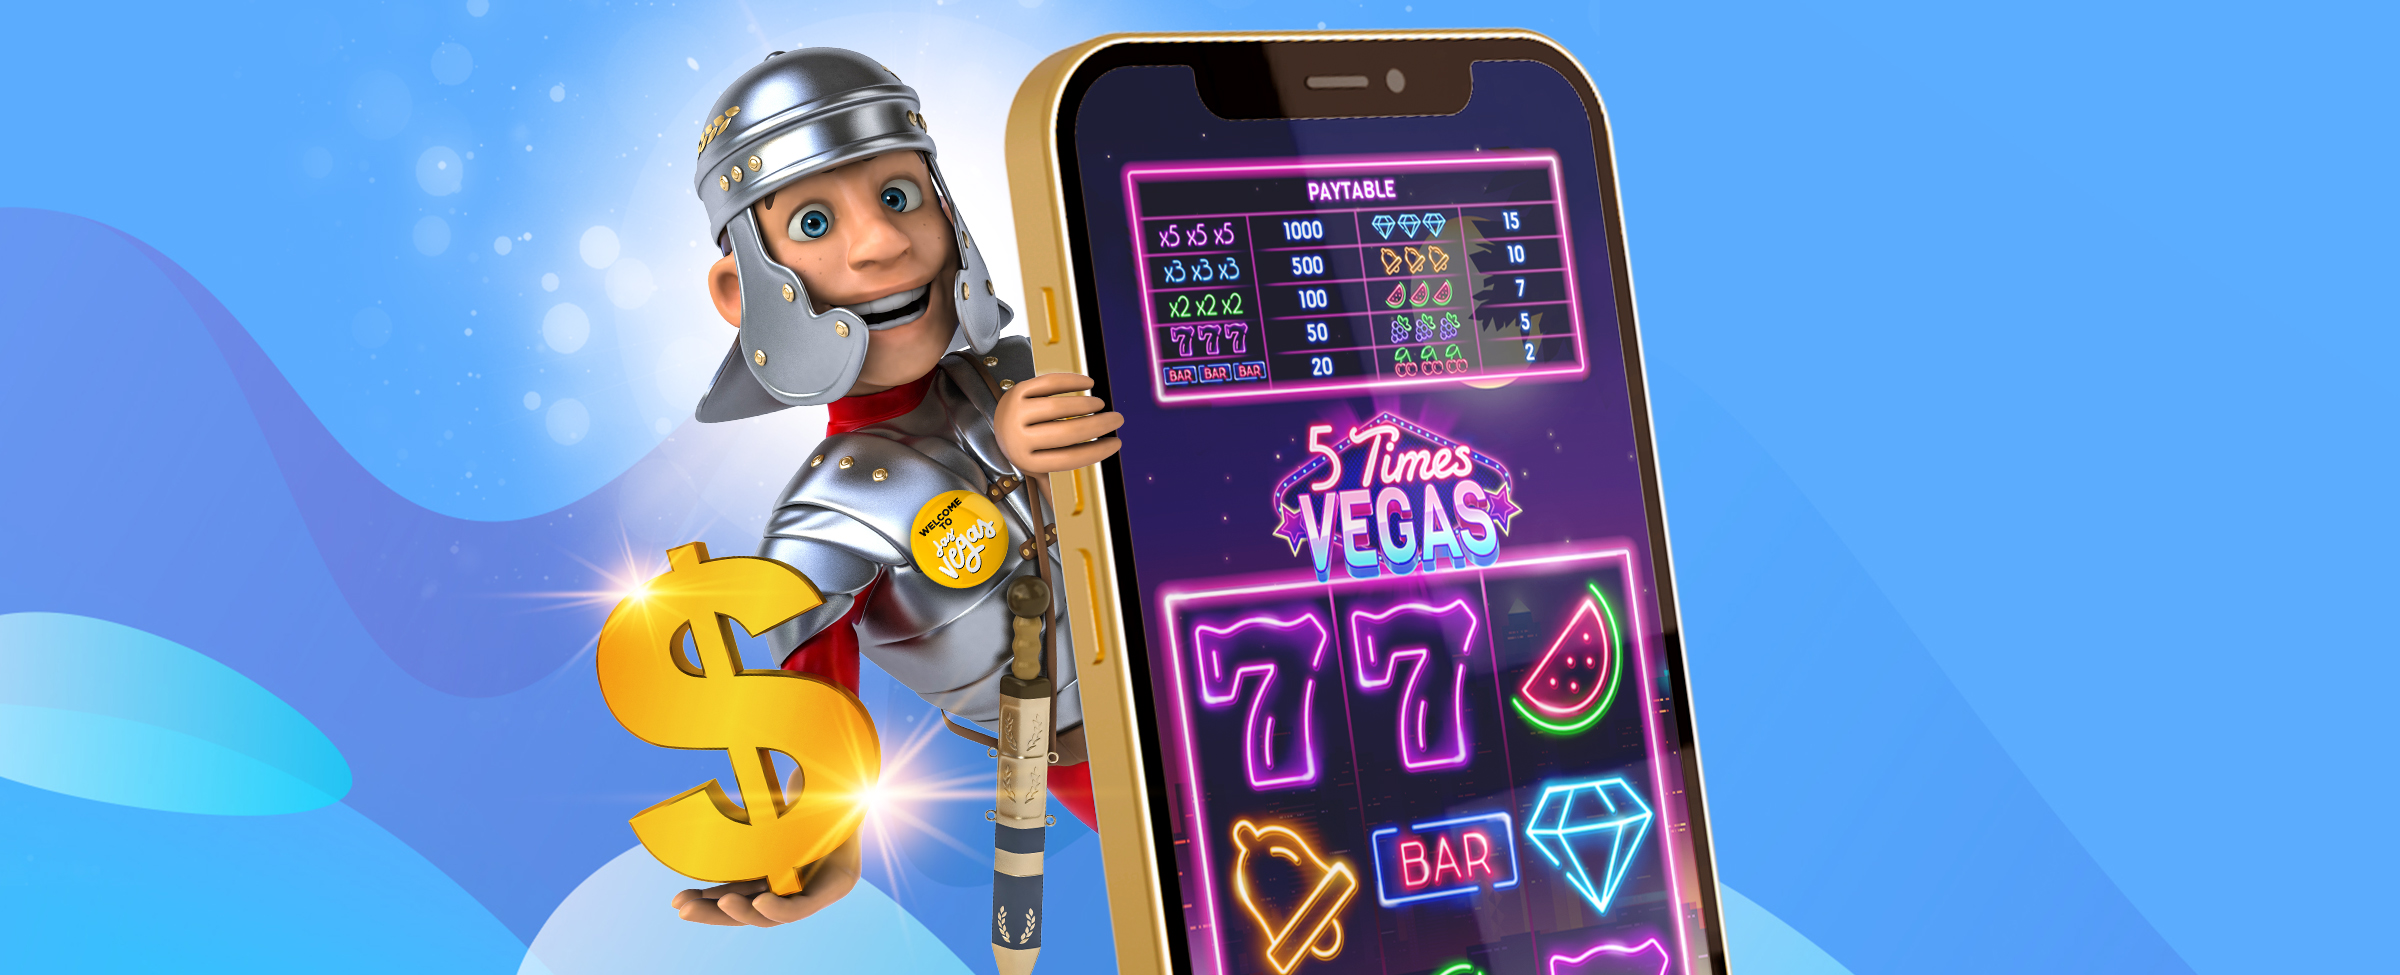 What’s hotter than a smashingly good time in Vegas? Why, four more times just like it, of course! Join the fun X5 in our sizzling slot game review of 5 Times Vegas.